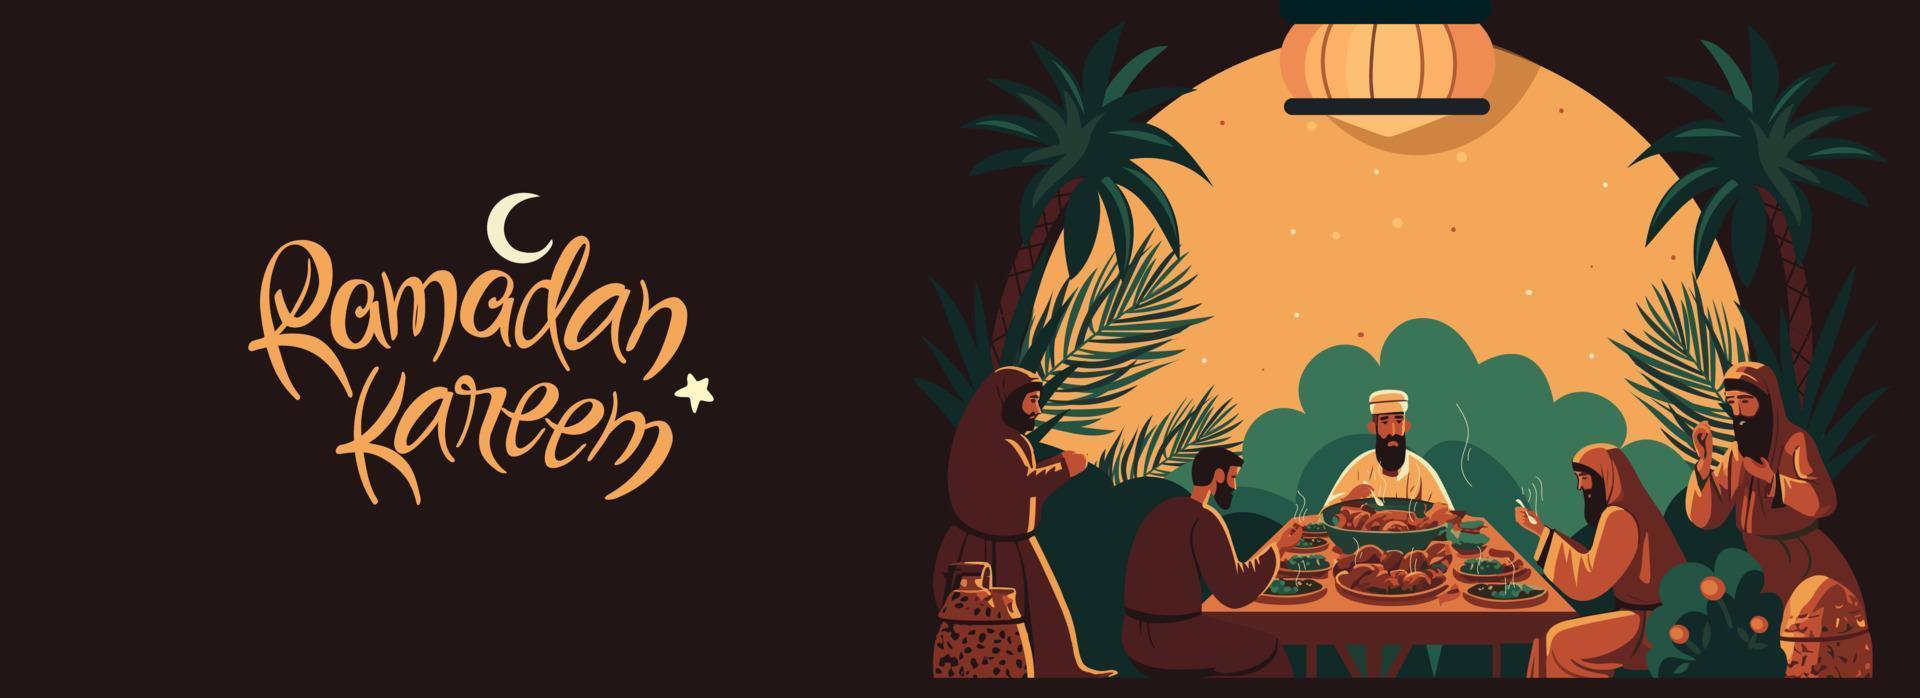 Ramadan Kareem Banner Design With Group of Islamic Men Enjoying Delicious Meals On Nature Background. vector